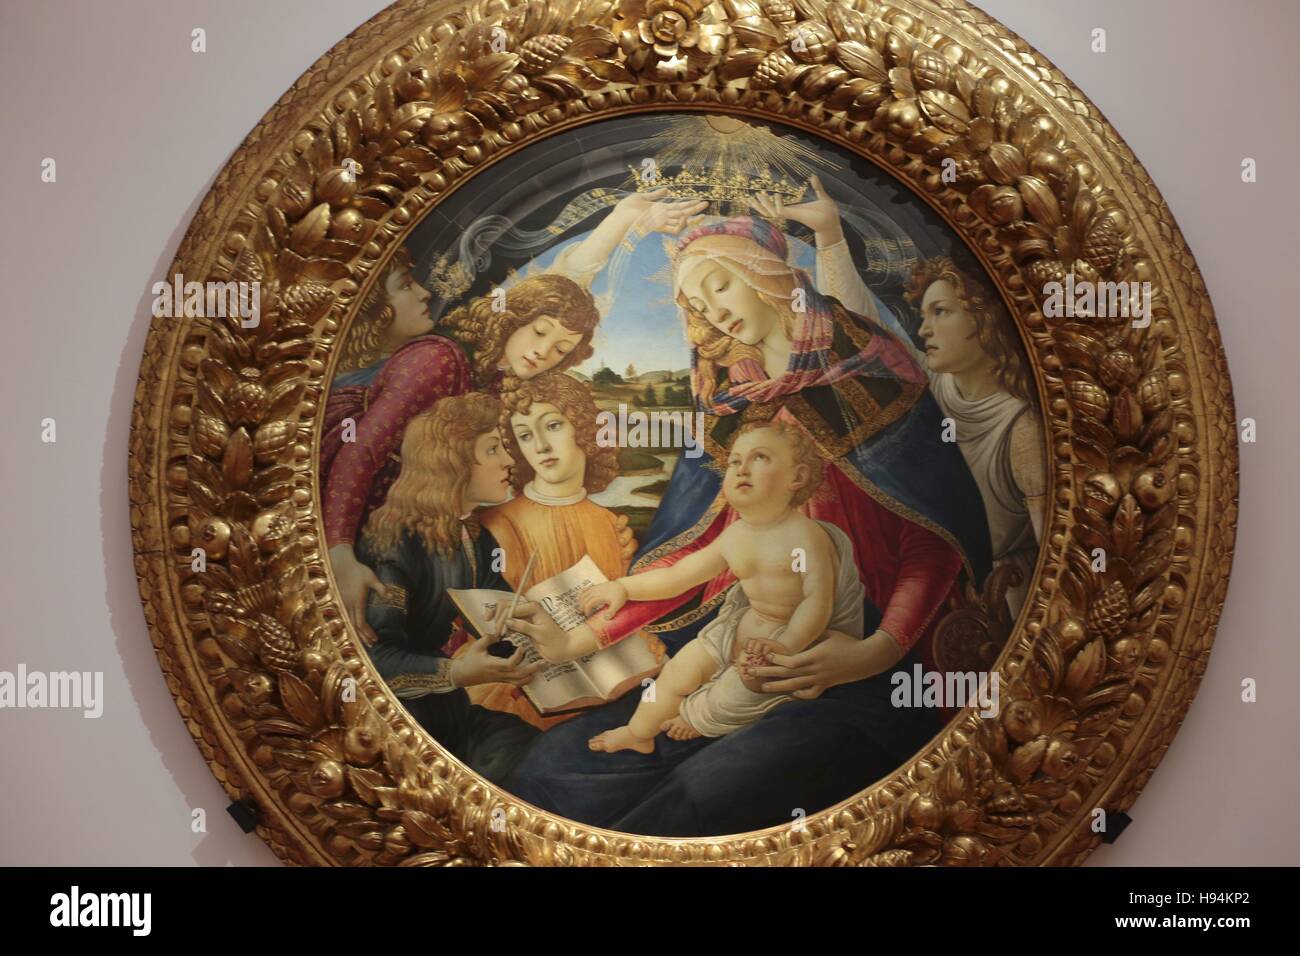 'Madonna del Magnificat', by Sandro Botticelli, at the reopening of the Uffizi gallery halls dedicated to Pollaiolo and Botticelli, organized thanks to a large donation from the Friends of Florence Foundation.  Where: Florence, Tuscany, Italy When: 17 Oct Stock Photo